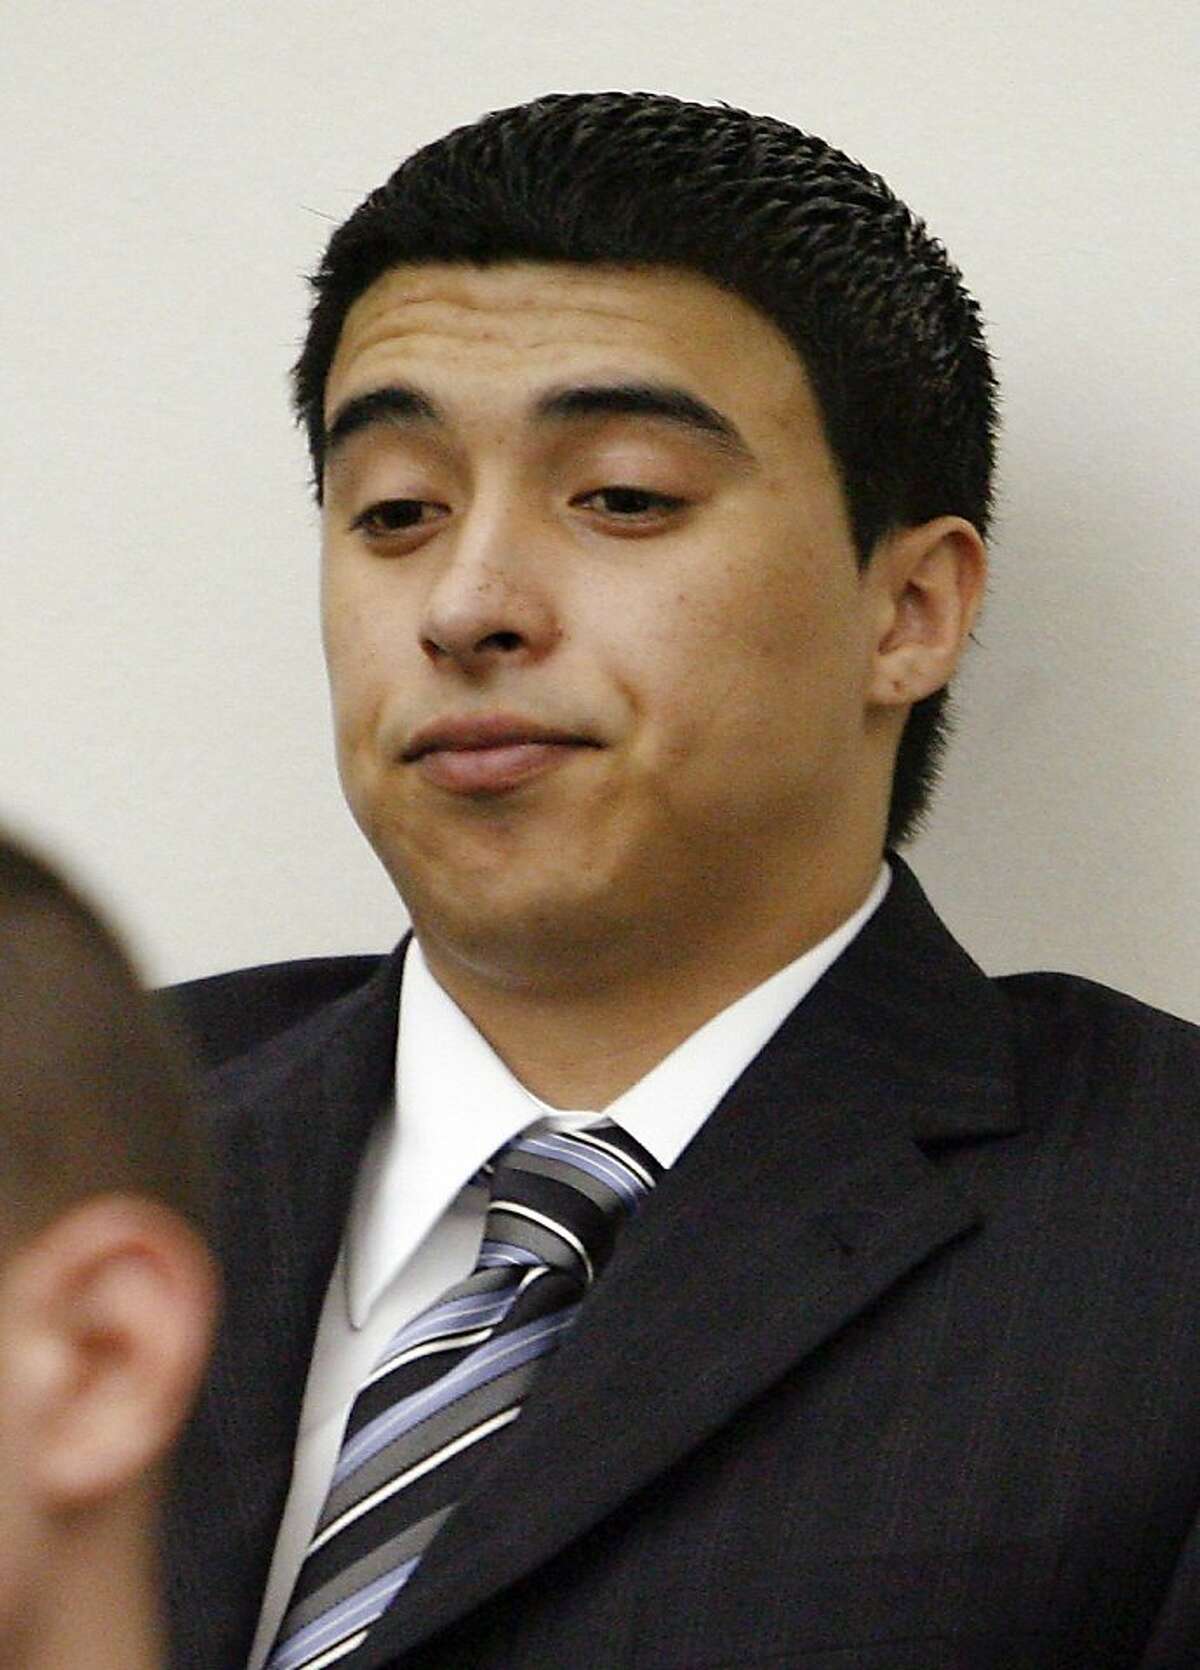 FILE - In this March 18, 2009 file photo, Esteban Nunez, son of former California Assembly speaker Fabian Nunez, is seen during a preliminary hearing on murder charges in Superior Court in San Diego. Saying that he thought the 16-year prison sentence Nunez was serving was "excessive," Gov. Arnold Schwarzenegger on Sunday, Jan. 2, 2011 reduced his sentence from 16 years to 7 years. The move comes just hours before Schwarzenegger leaves office.